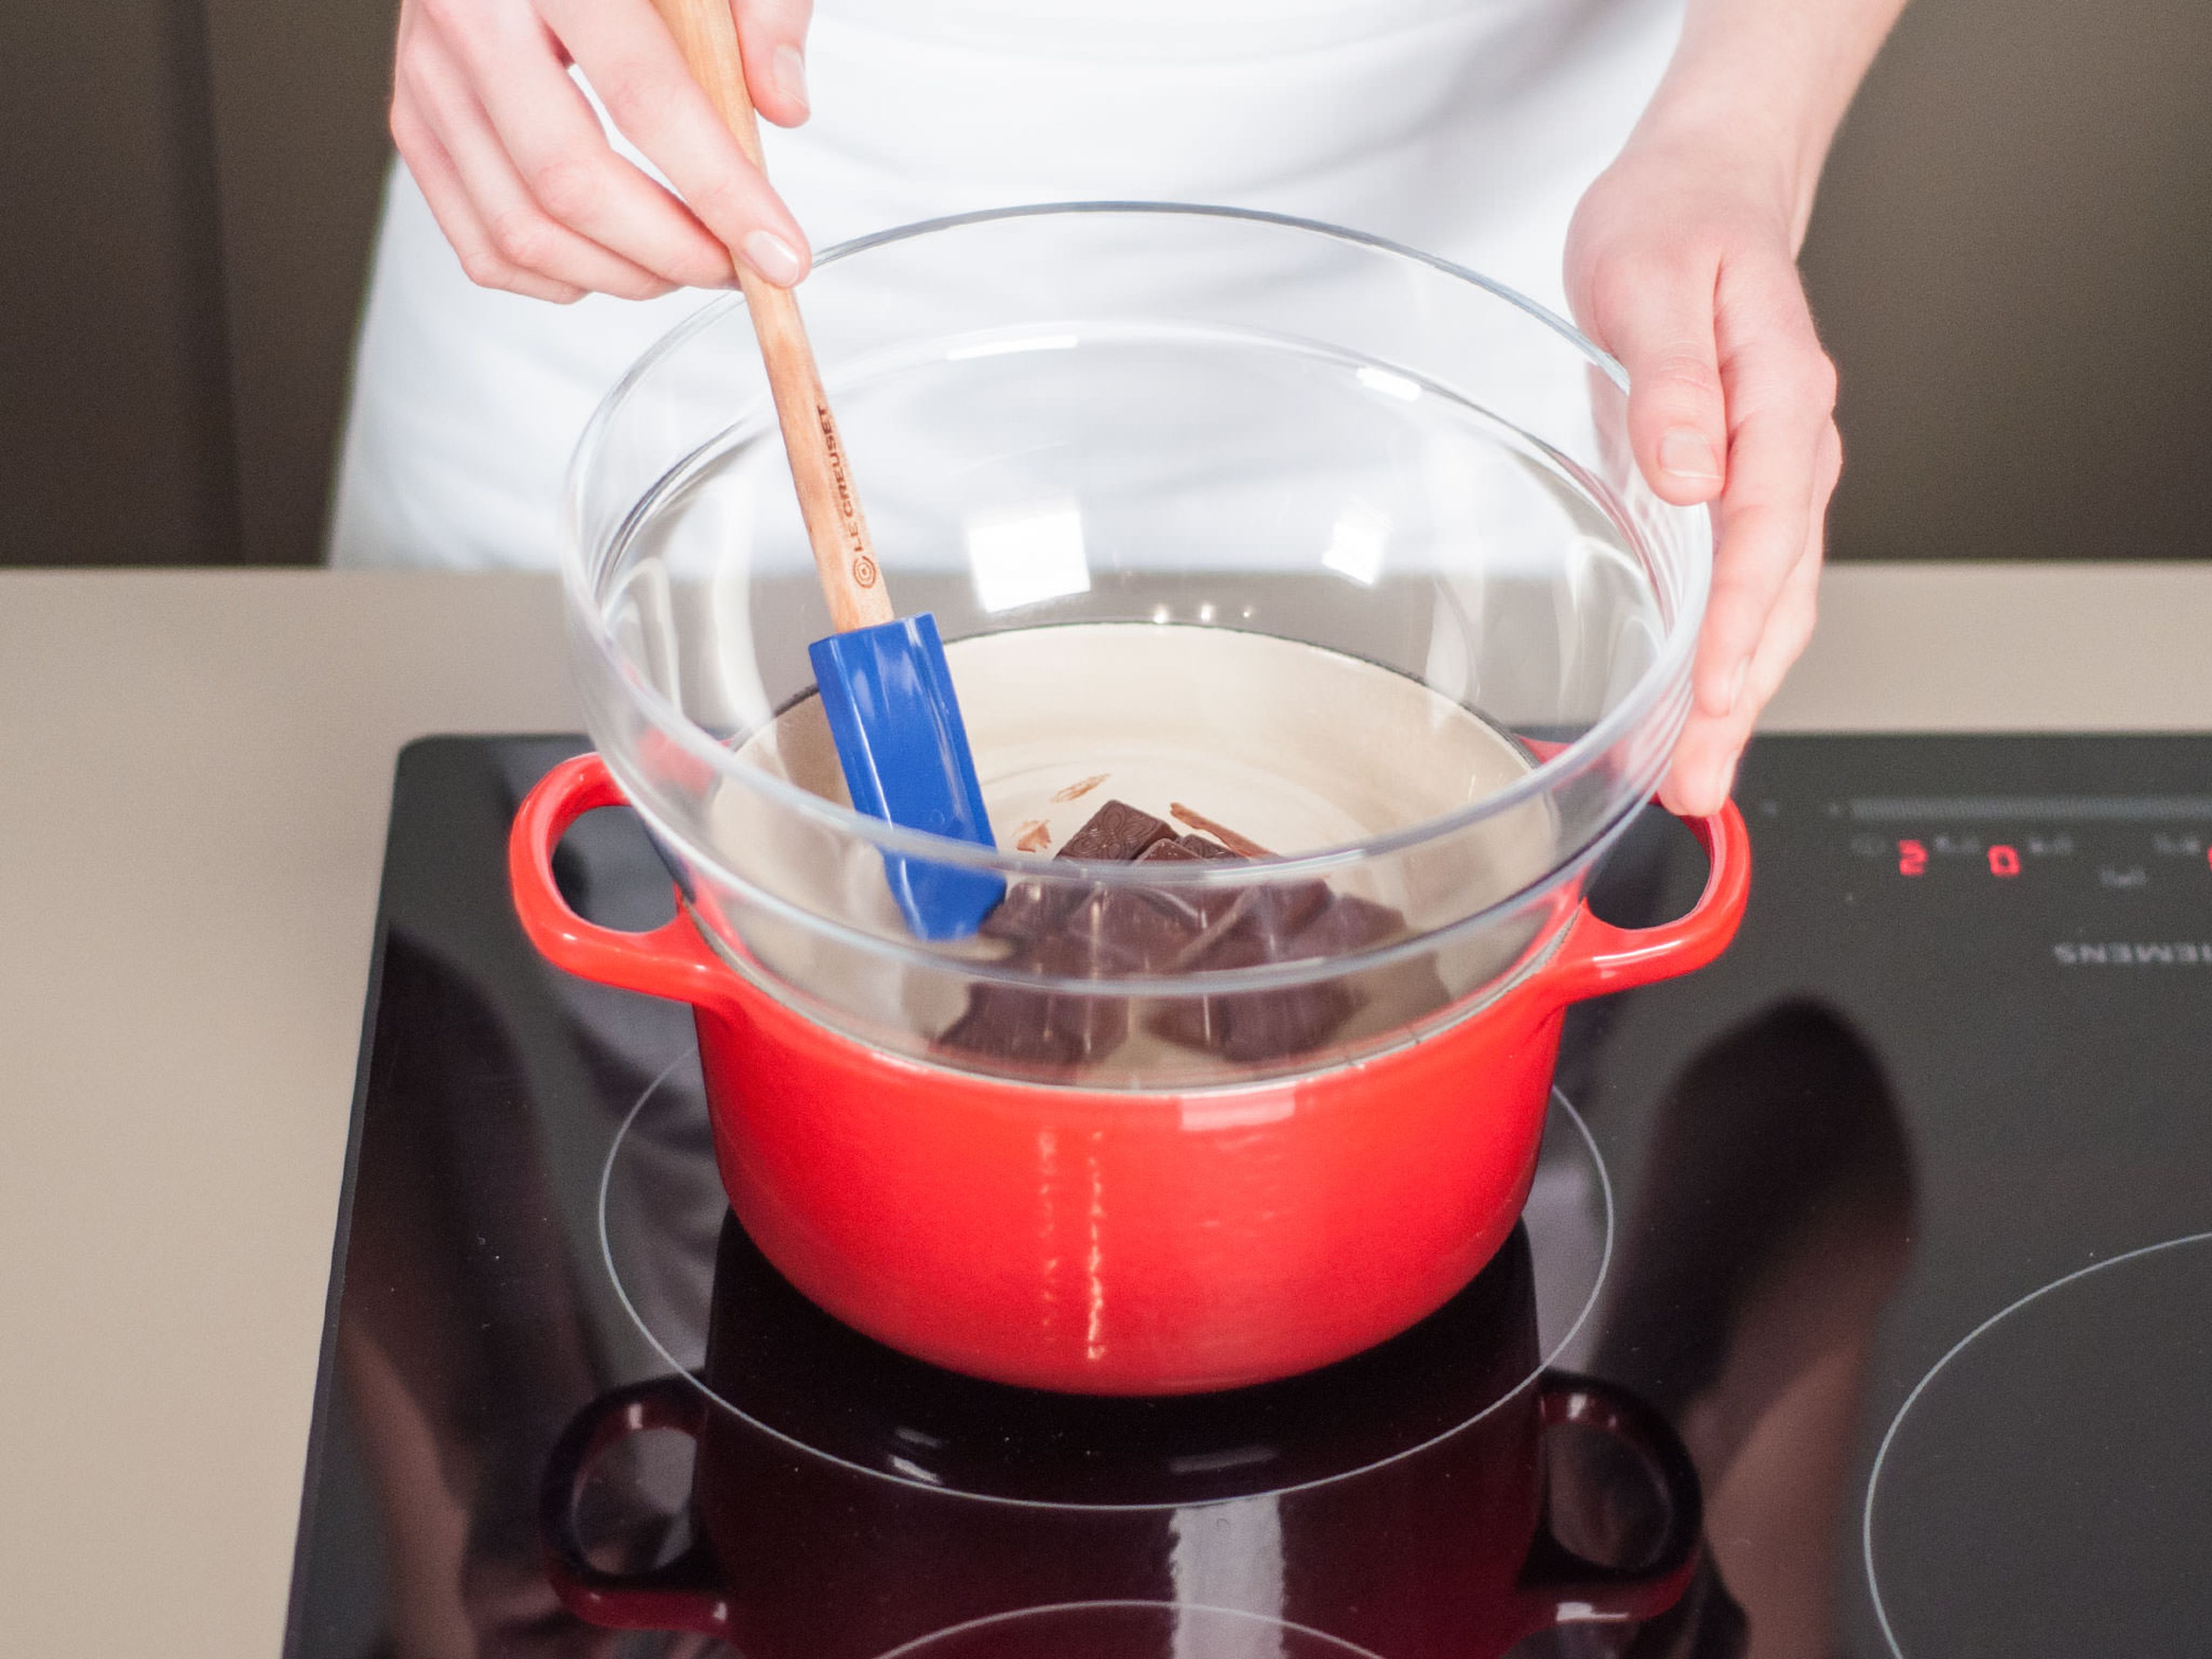 Melt the bittersweet chocolate in a double boiler. Set aside.